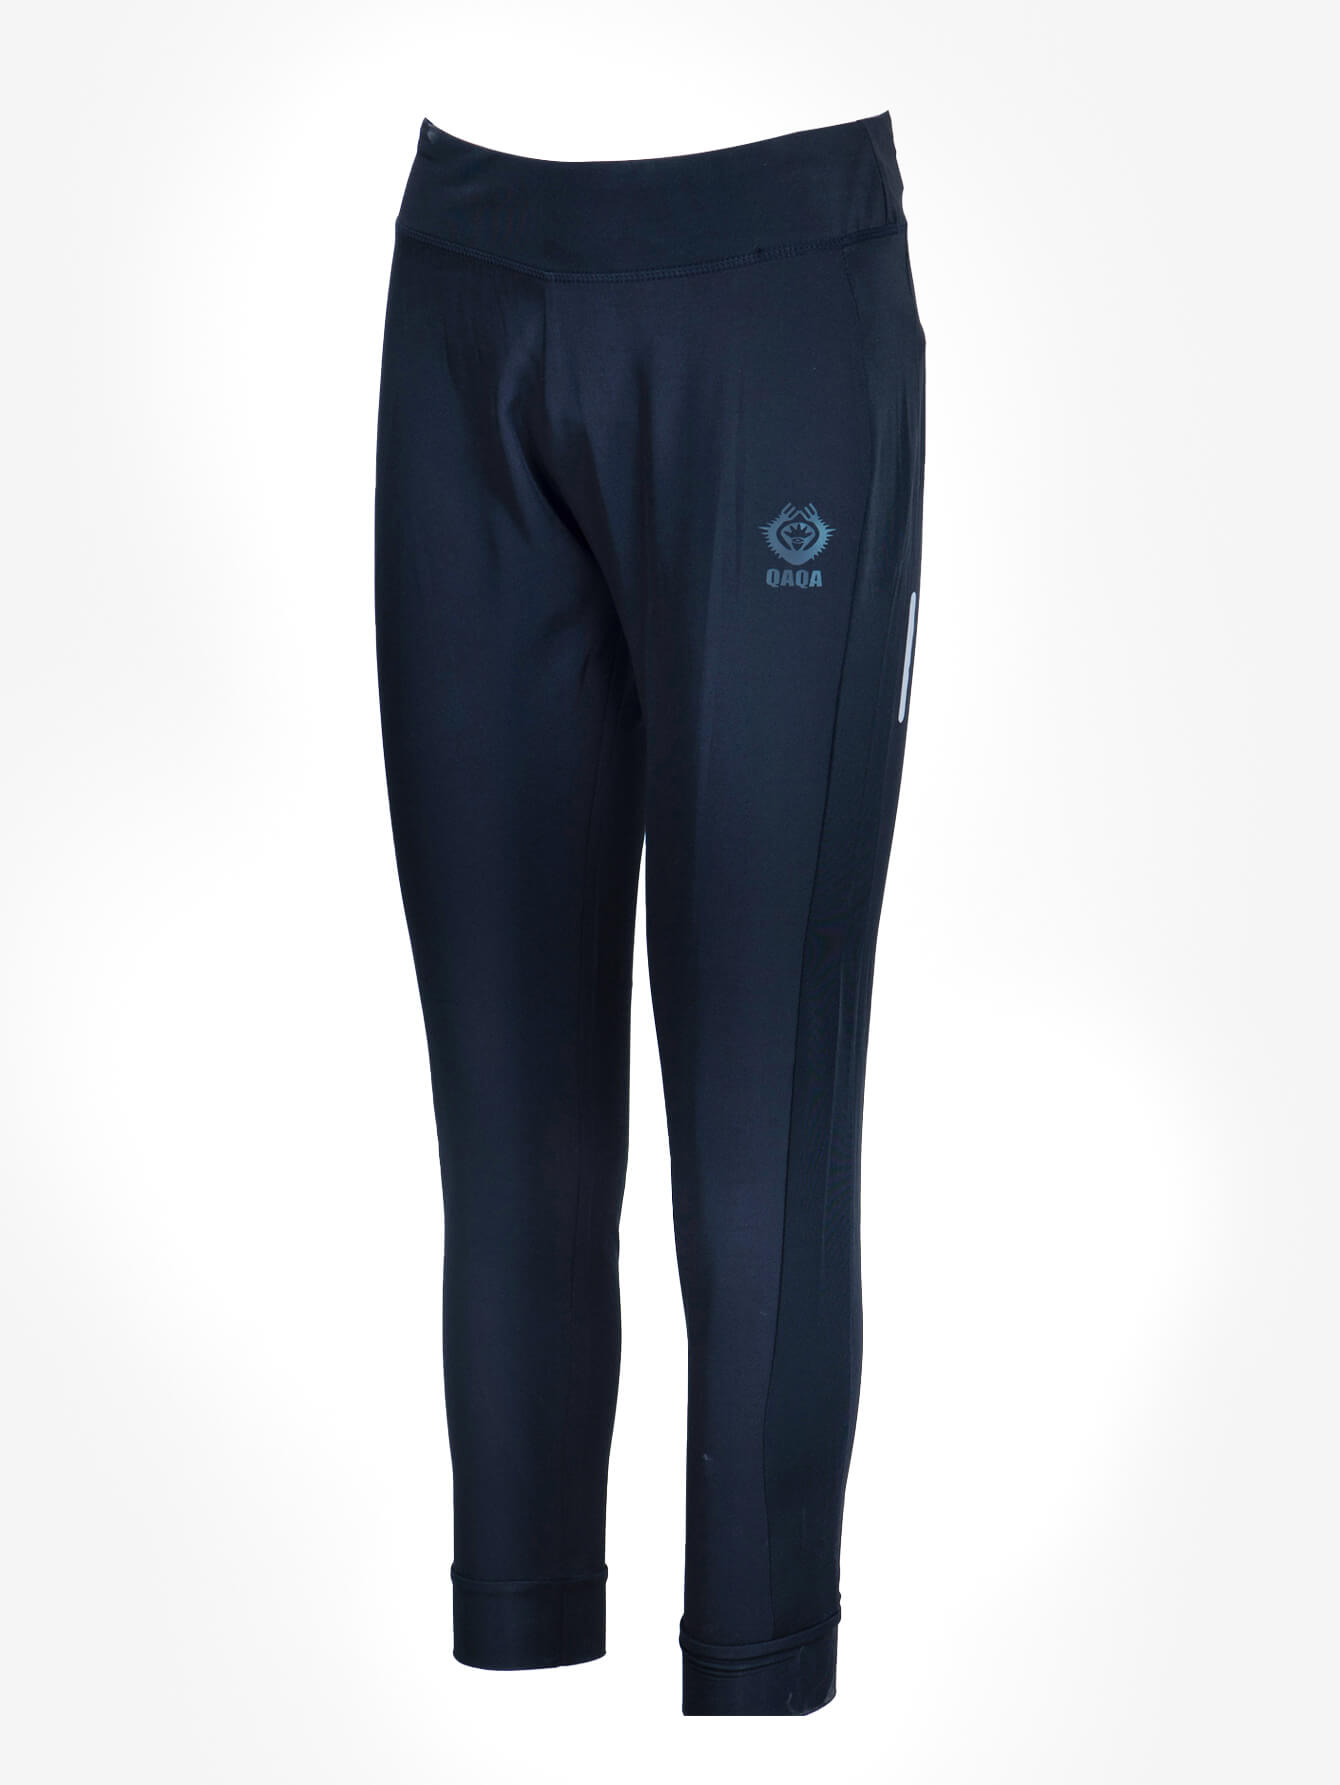 Bottom Wear Ladies Track and Night Pants